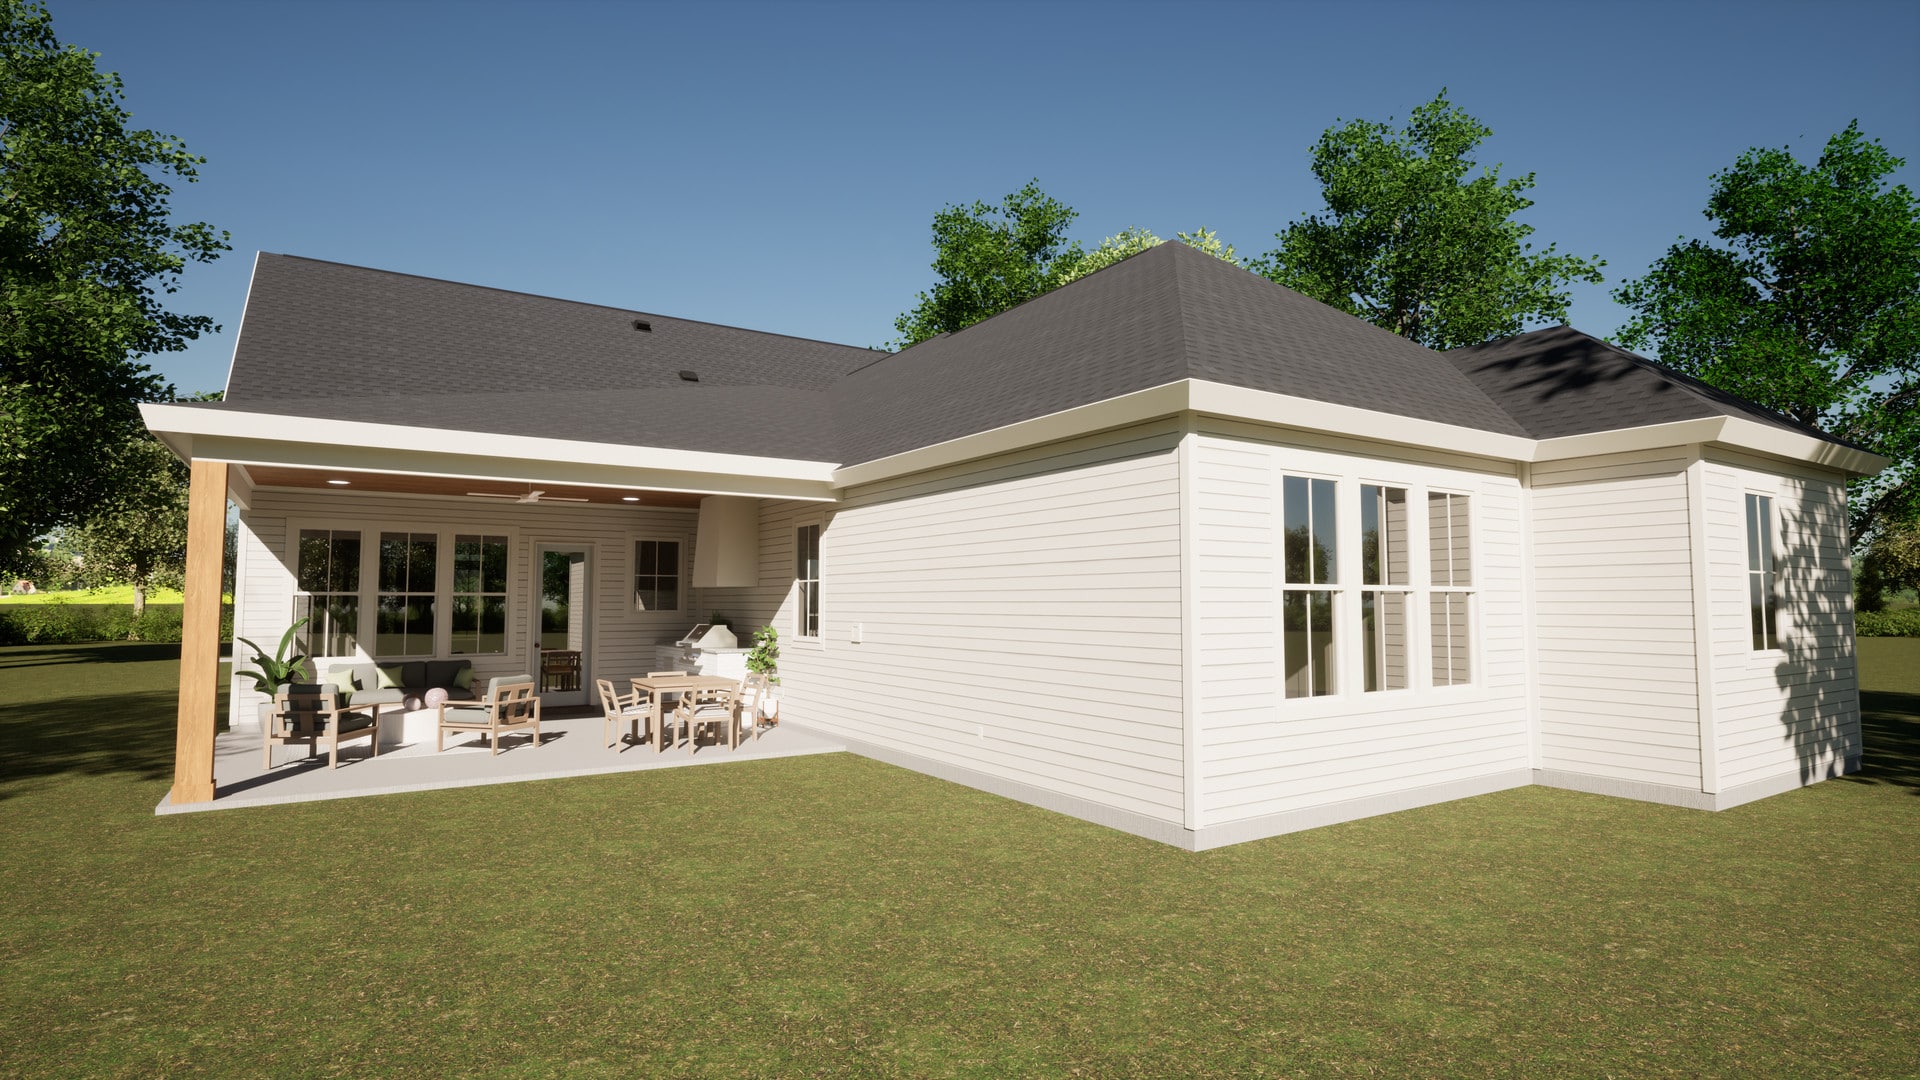 a rendering of a small house with a patio.